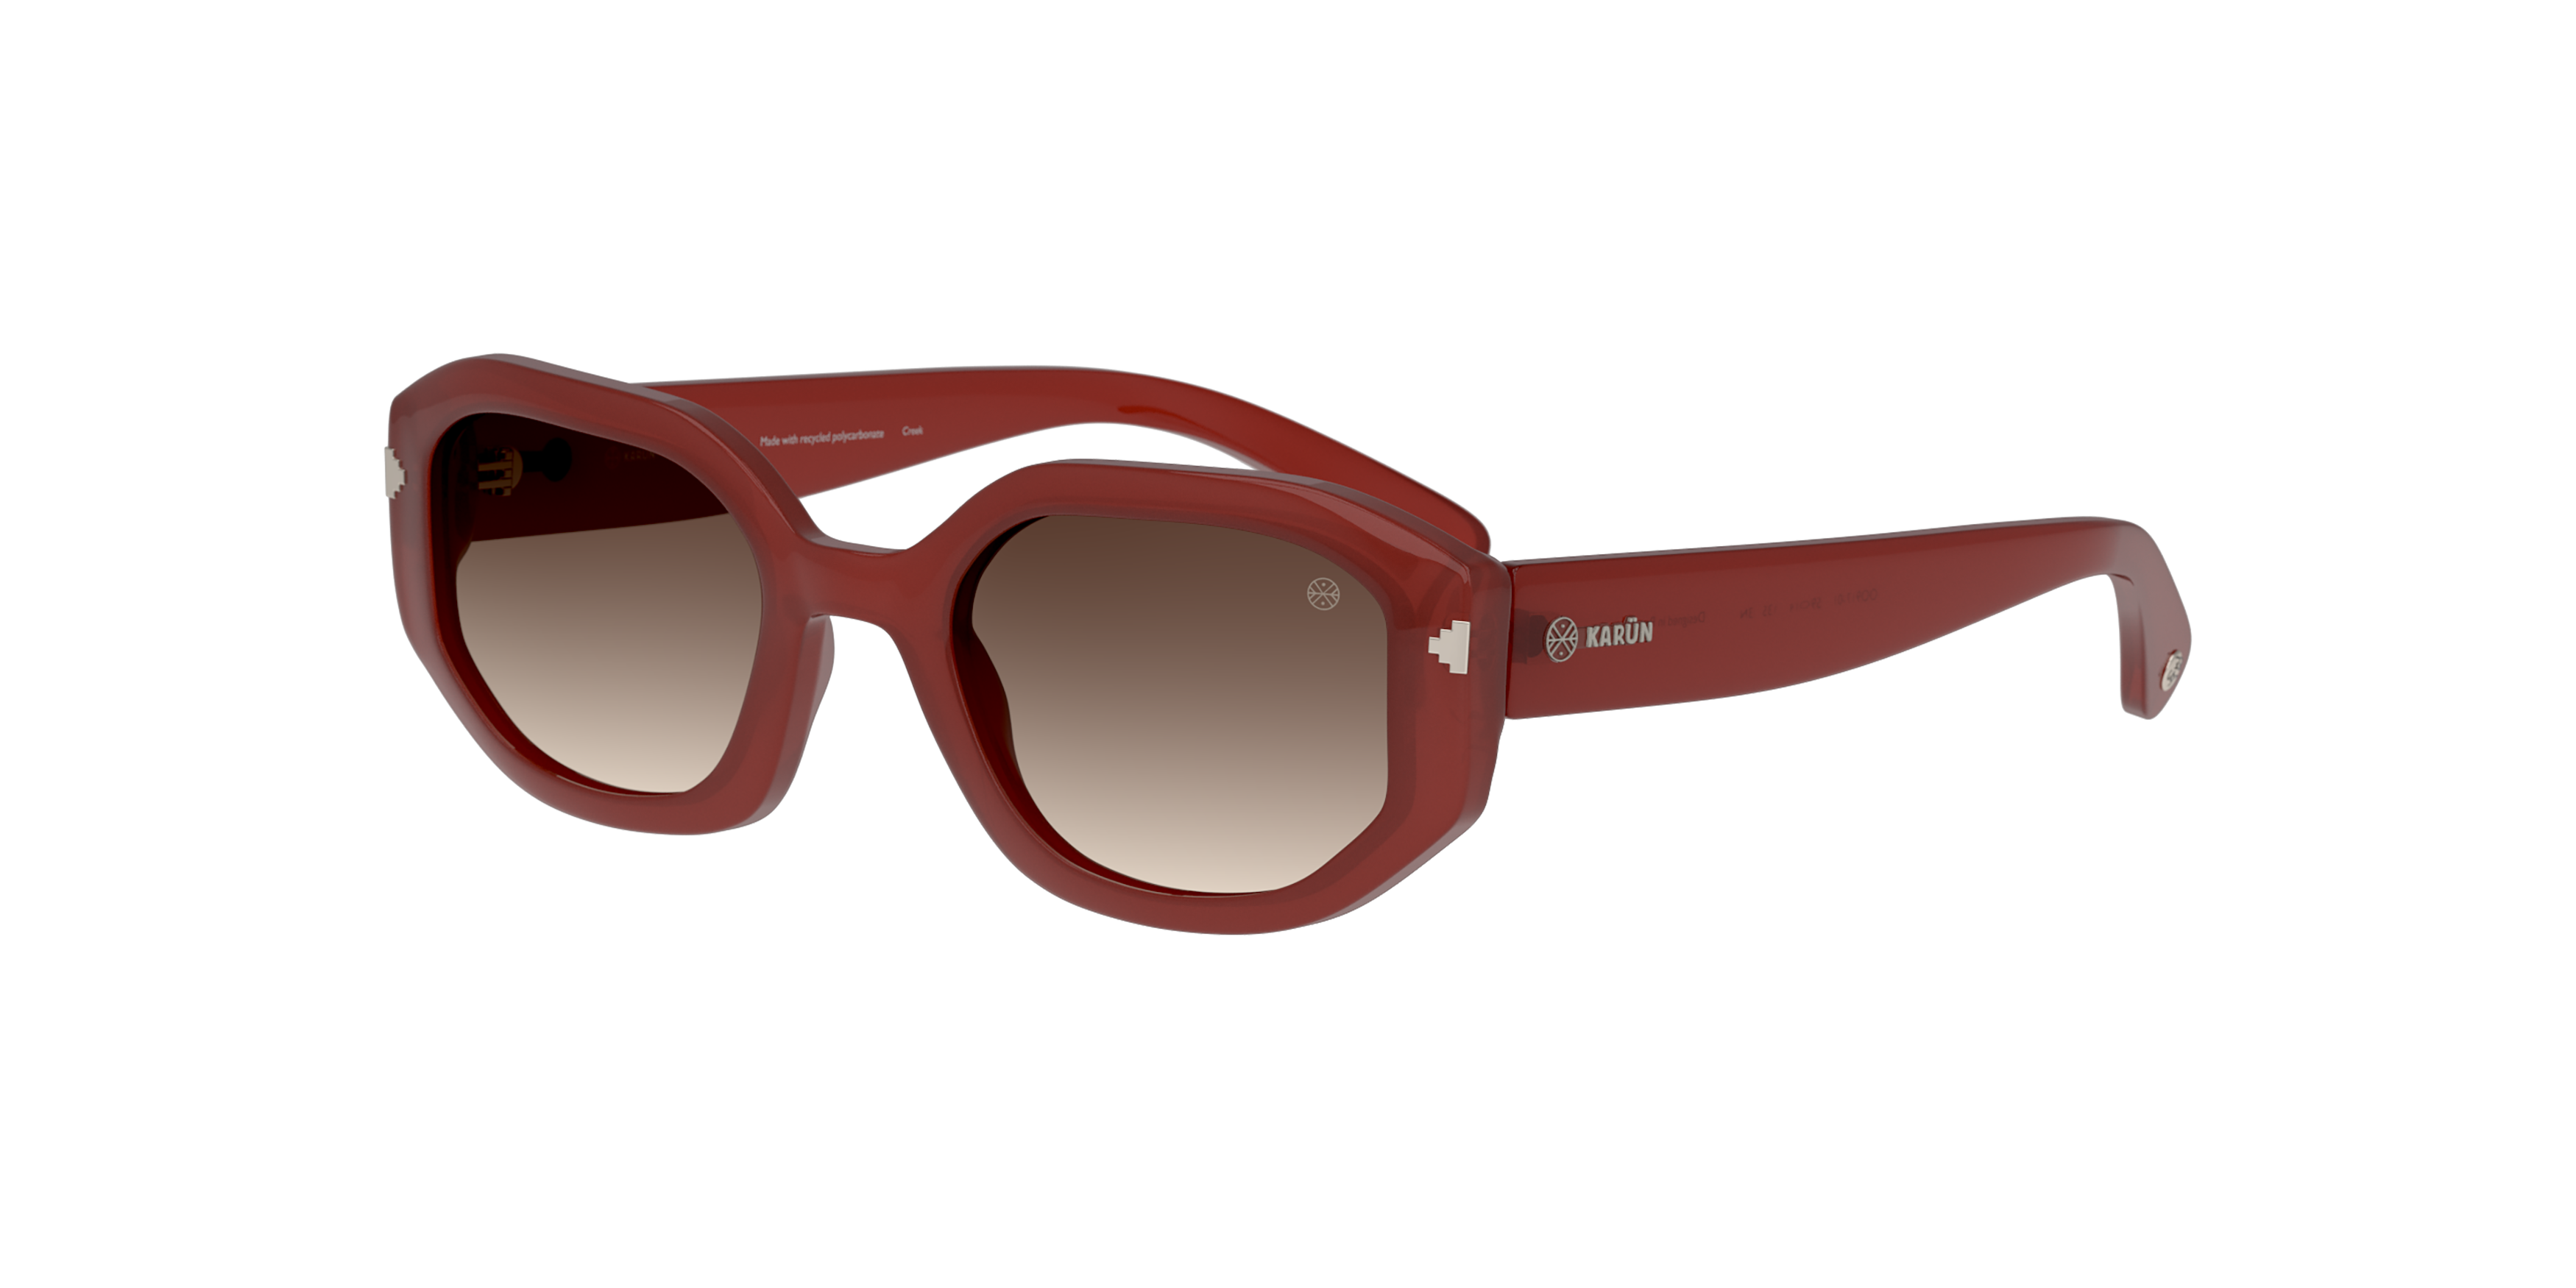 Angle_Left01 Karun SW FS0184 (18-1443-PA) Sunglasses Brown / Red